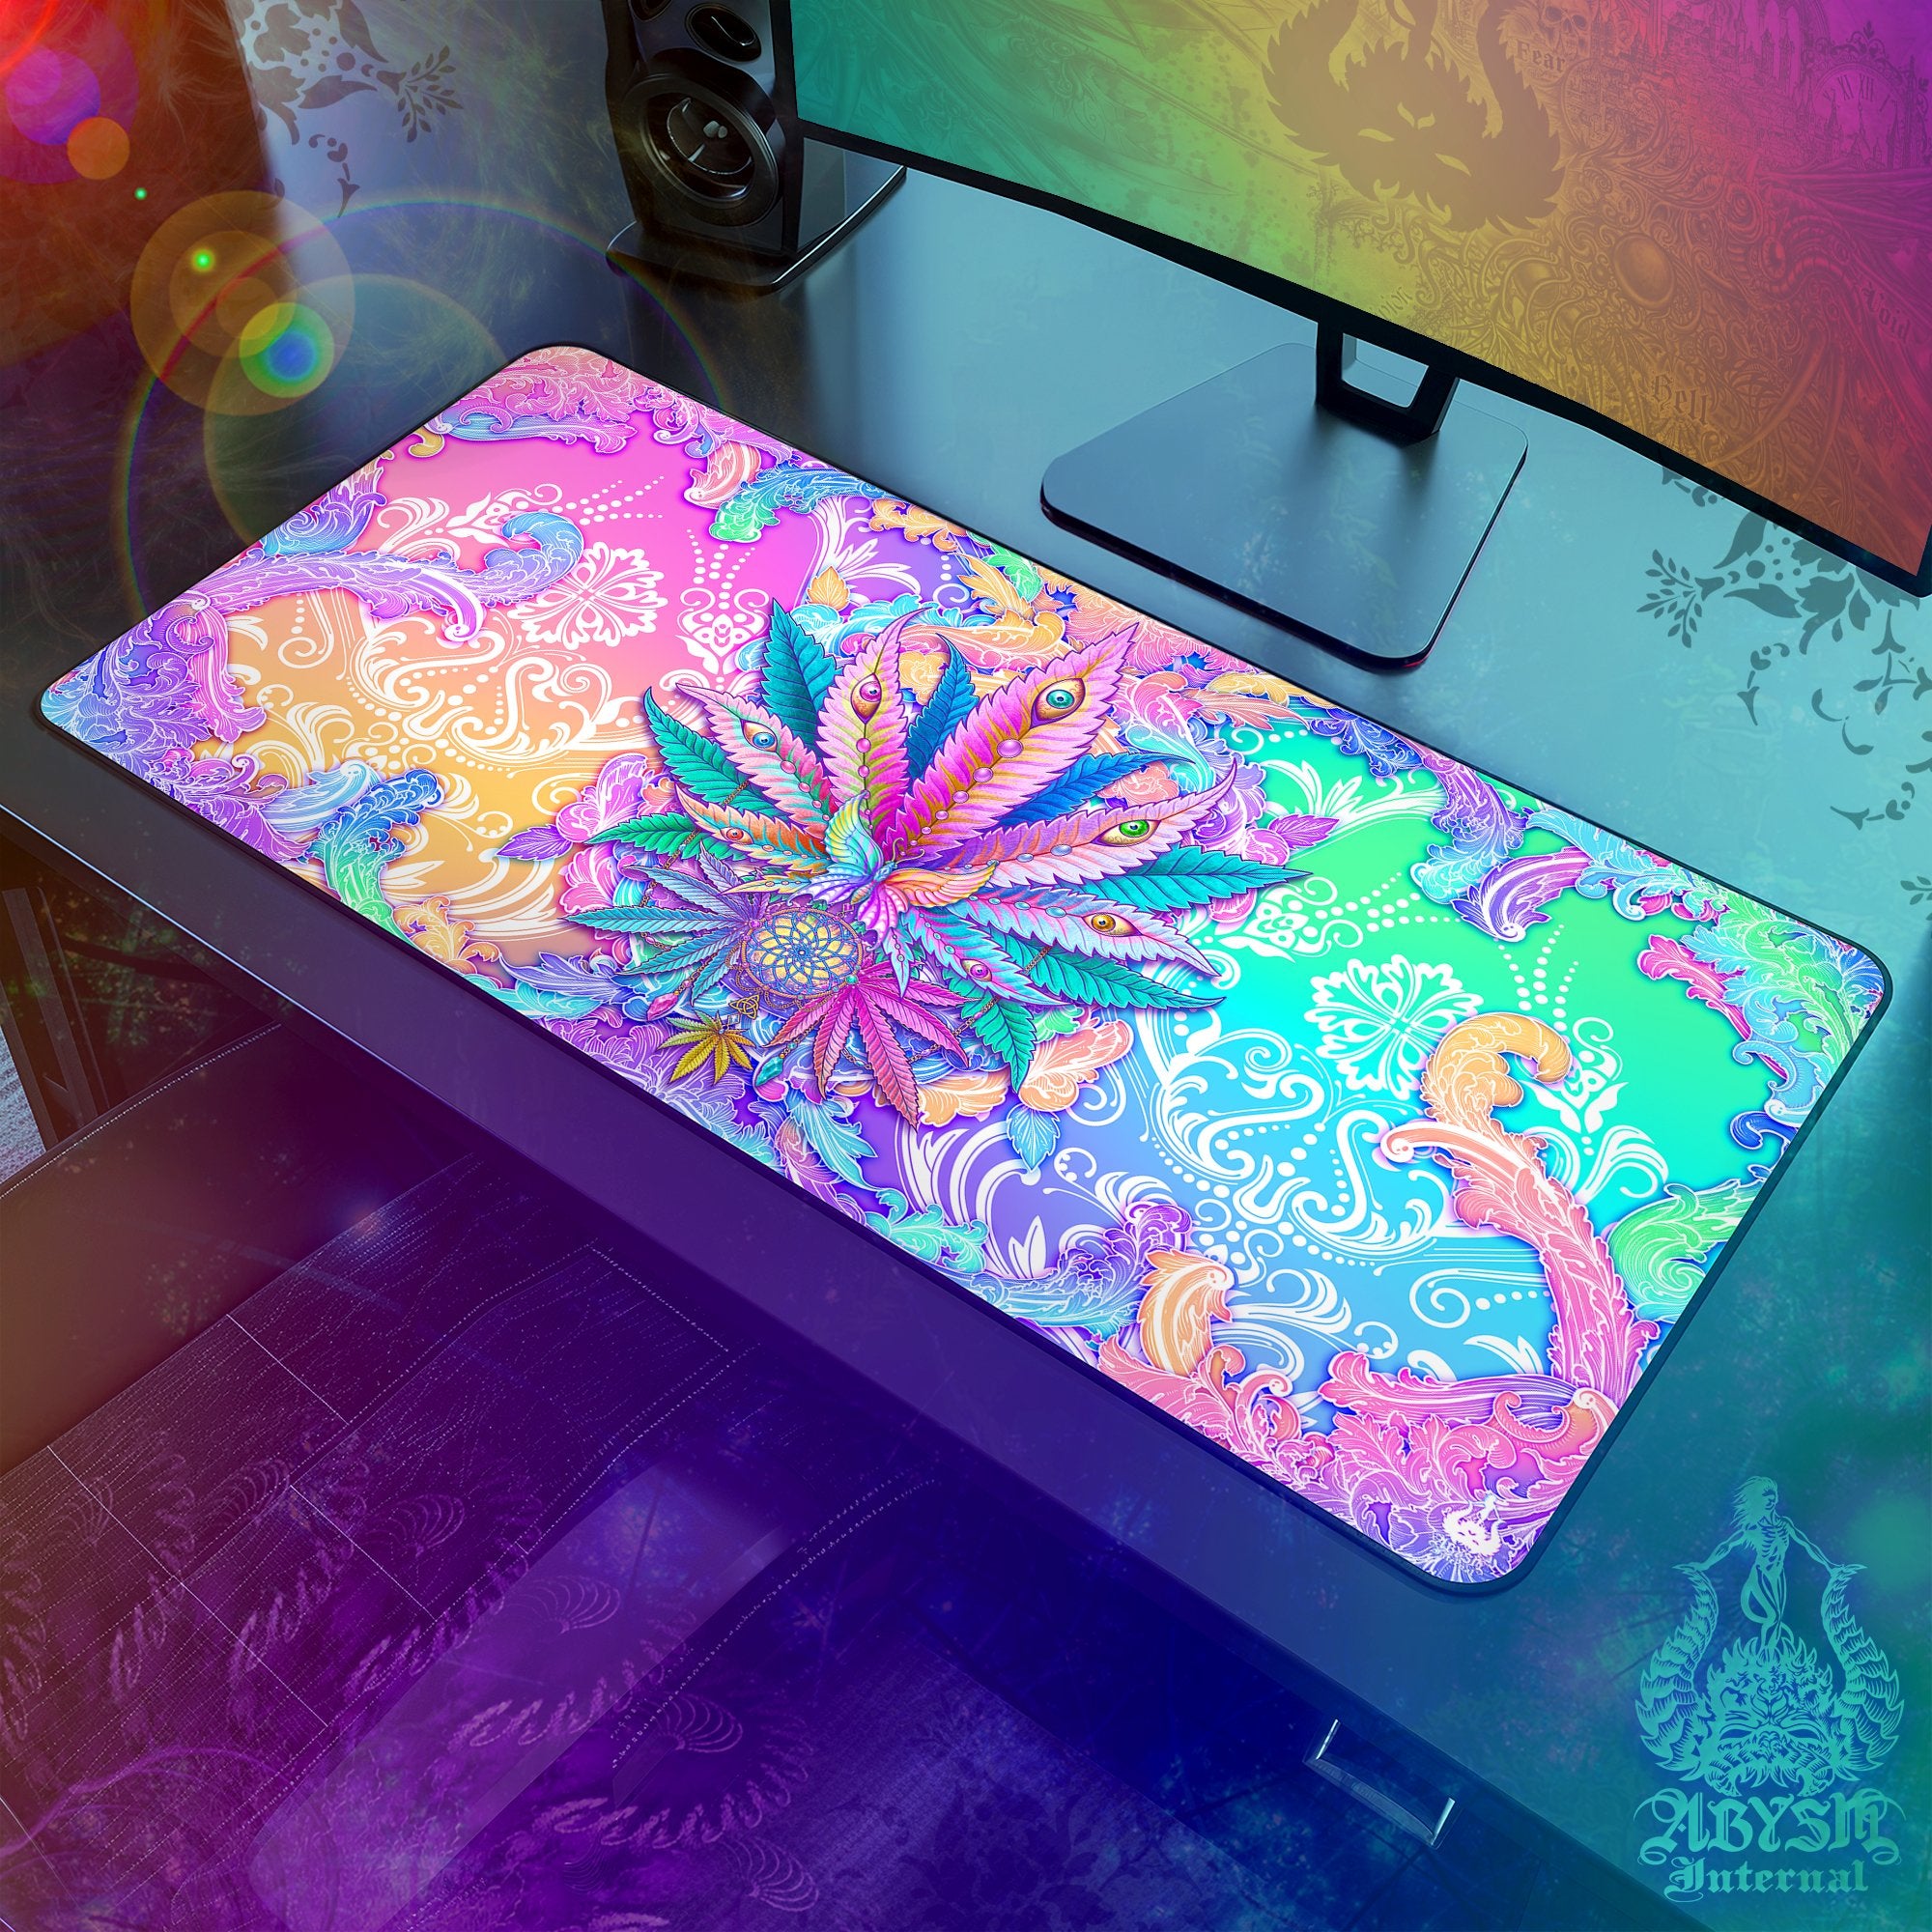 Psychedelic Mouse Pad, Aesthetic Marijuana Gaming Desk Mat, Cannabis Workpad, Weed Table Protector Cover, Pastel 420 Art Print - Abysm Internal